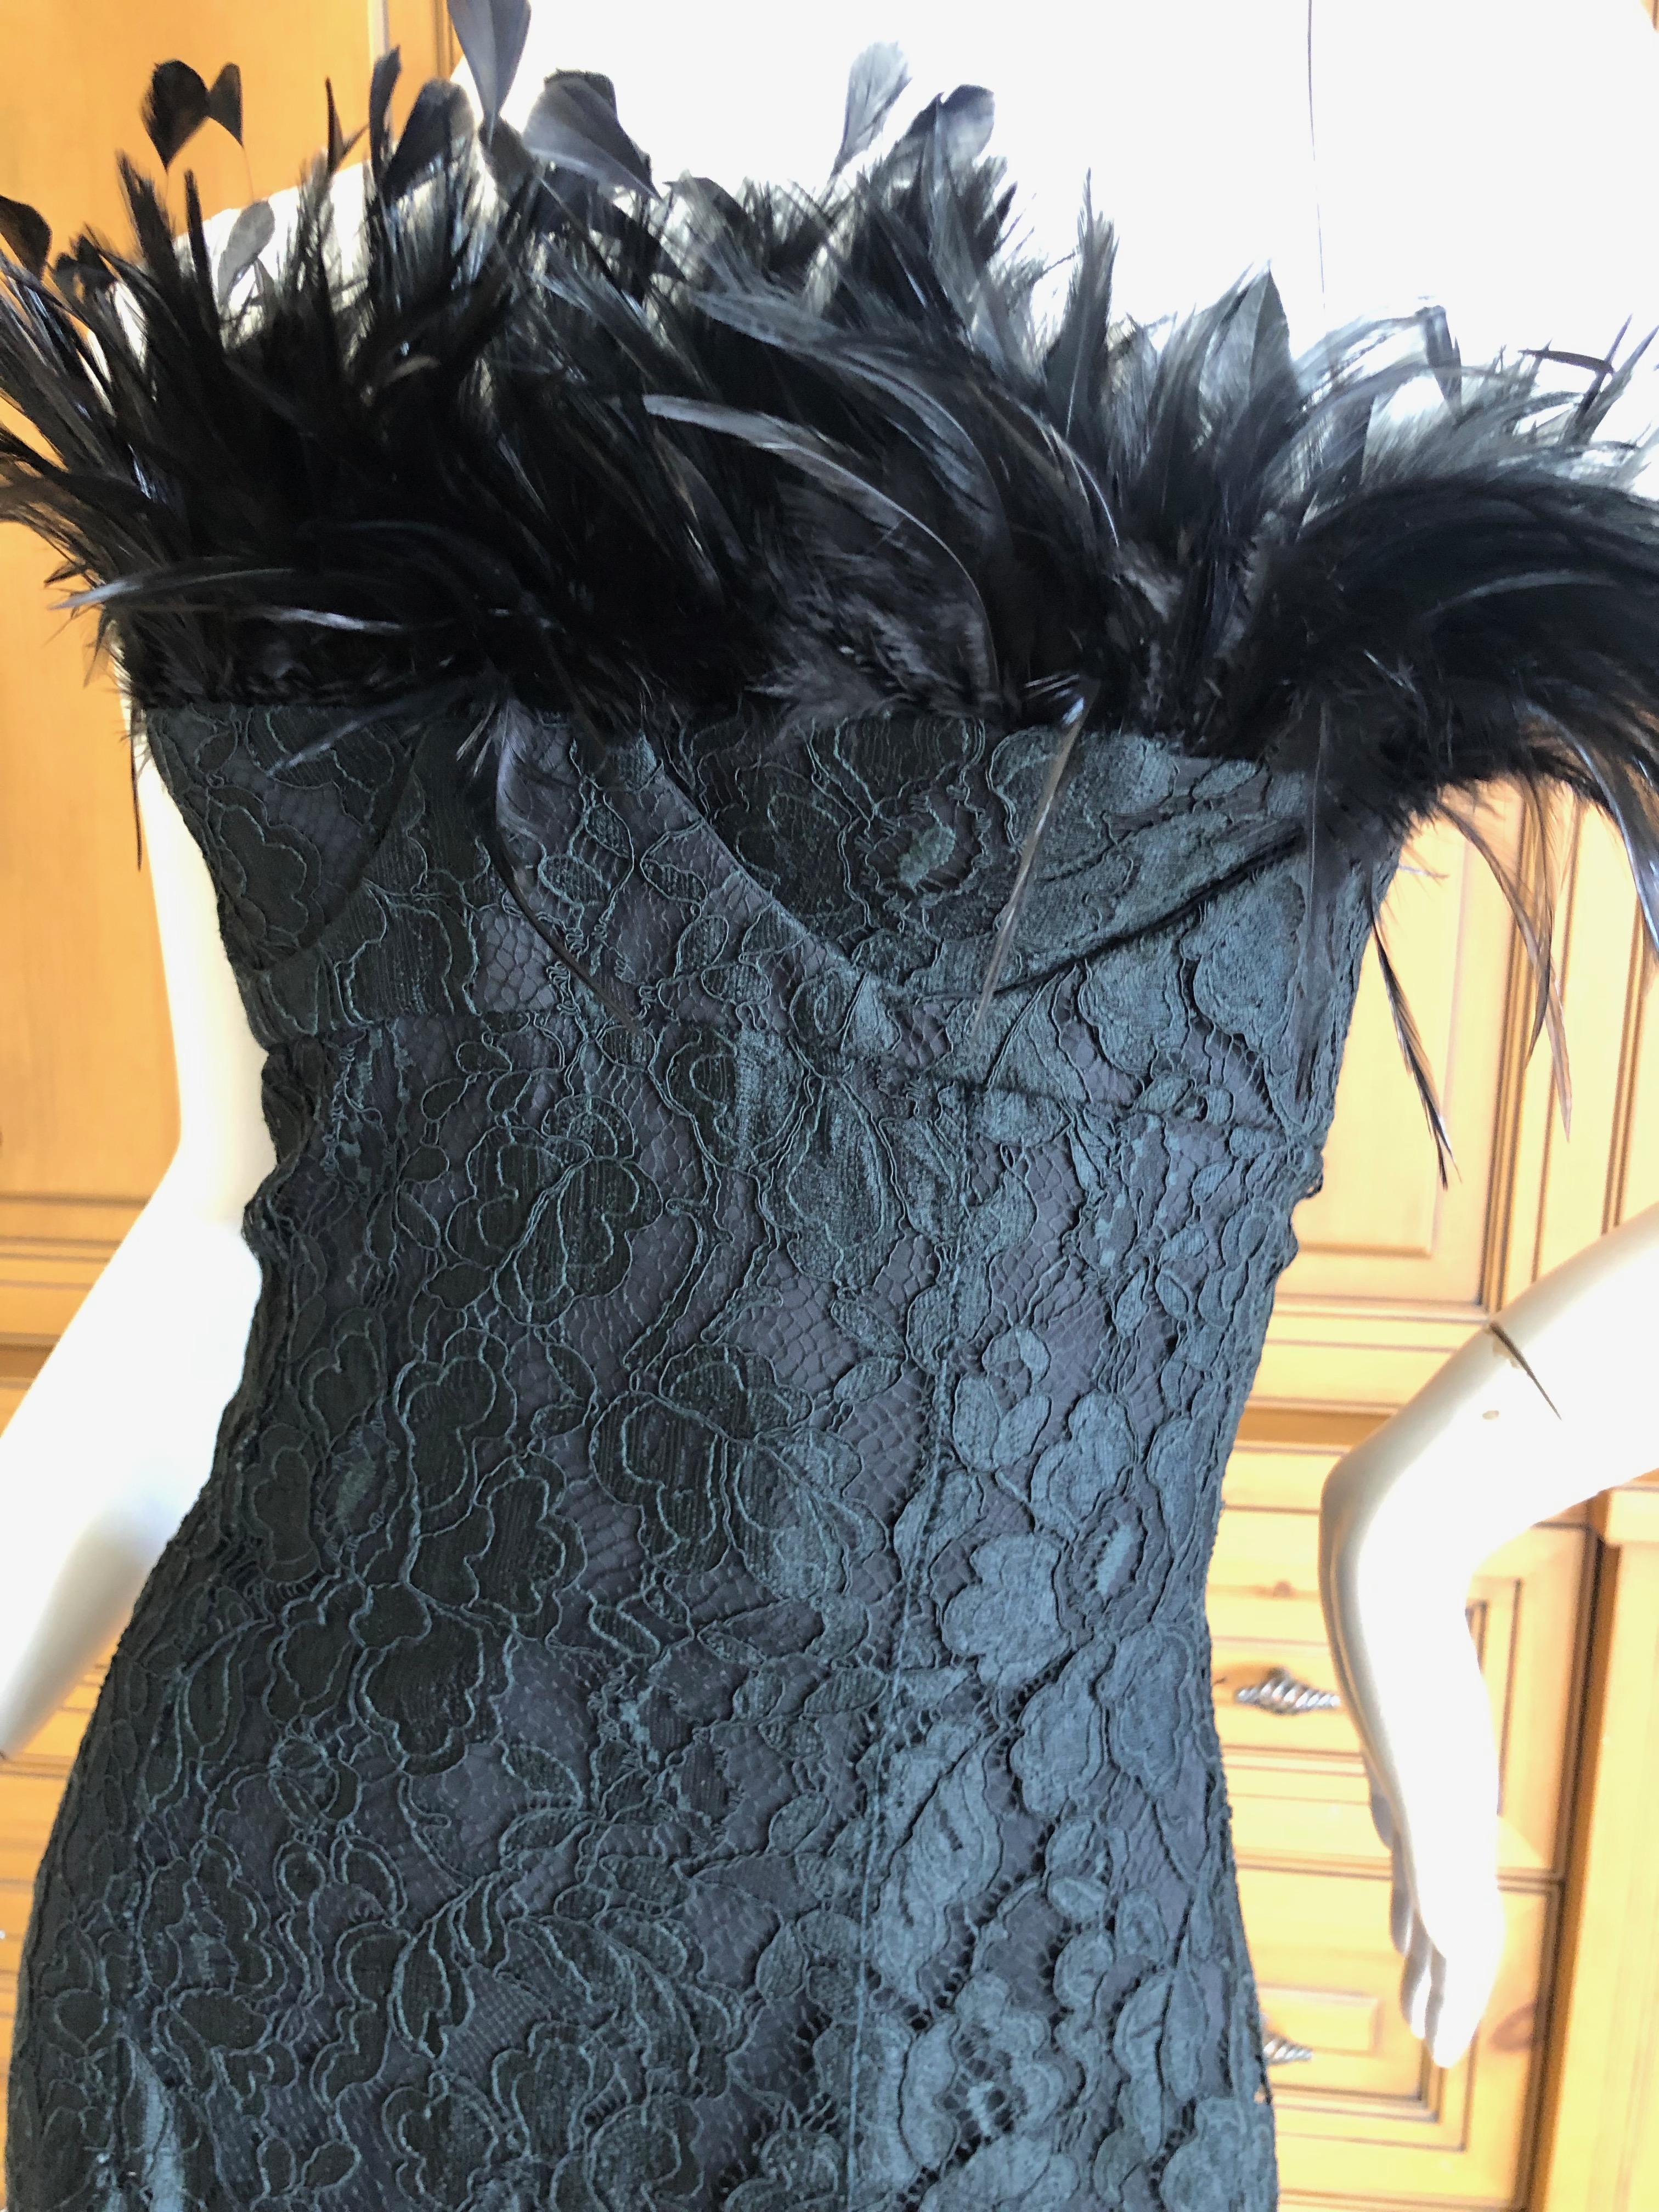 Yves Saint Laurent Vintage Feathered Strapless Black Lace Corset Cocktail Dress
 Size 36, this is tiny.
Full inner corset
 Bust 32